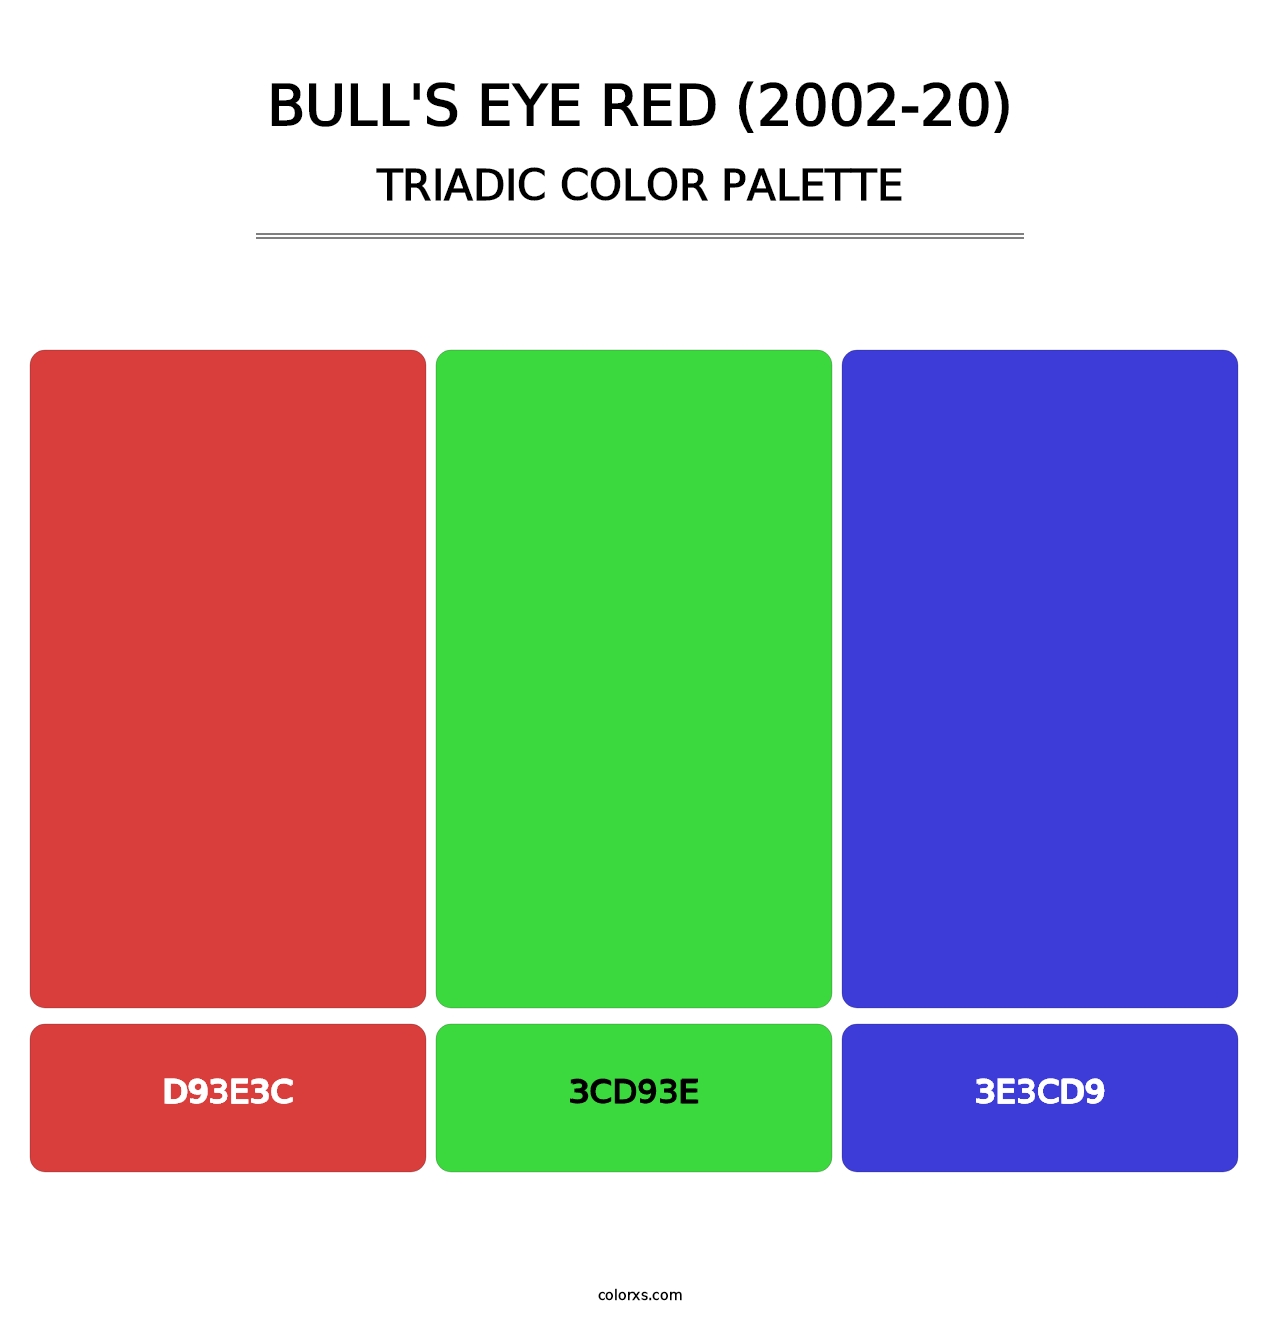 Bull's Eye Red (2002-20) - Triadic Color Palette